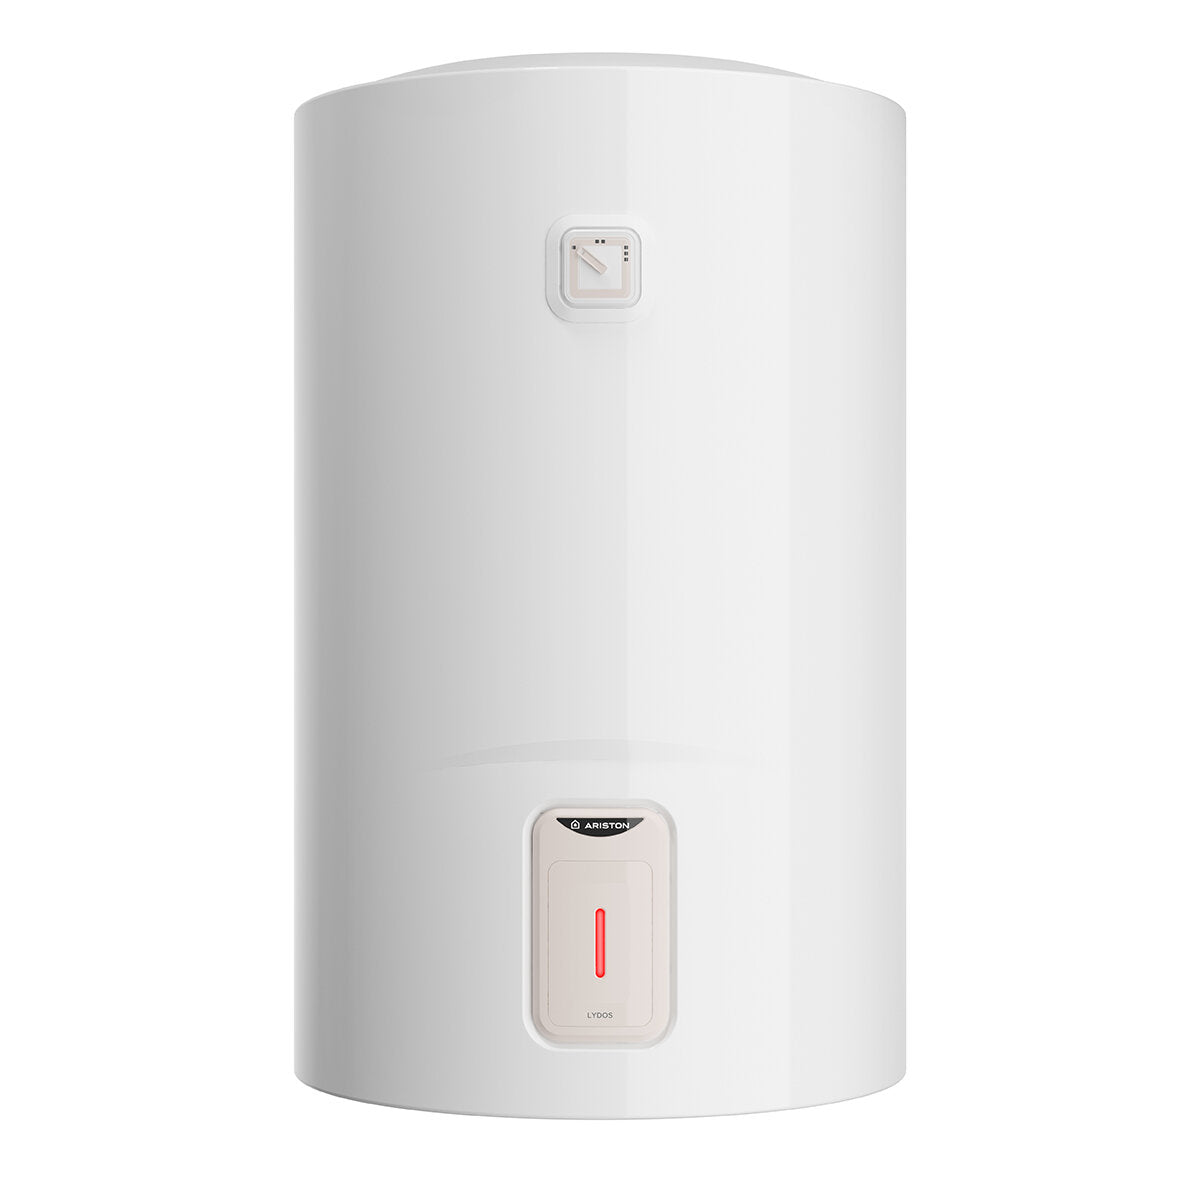 Lydos Dune R100 Ariston electric water heater 100 liters vertical